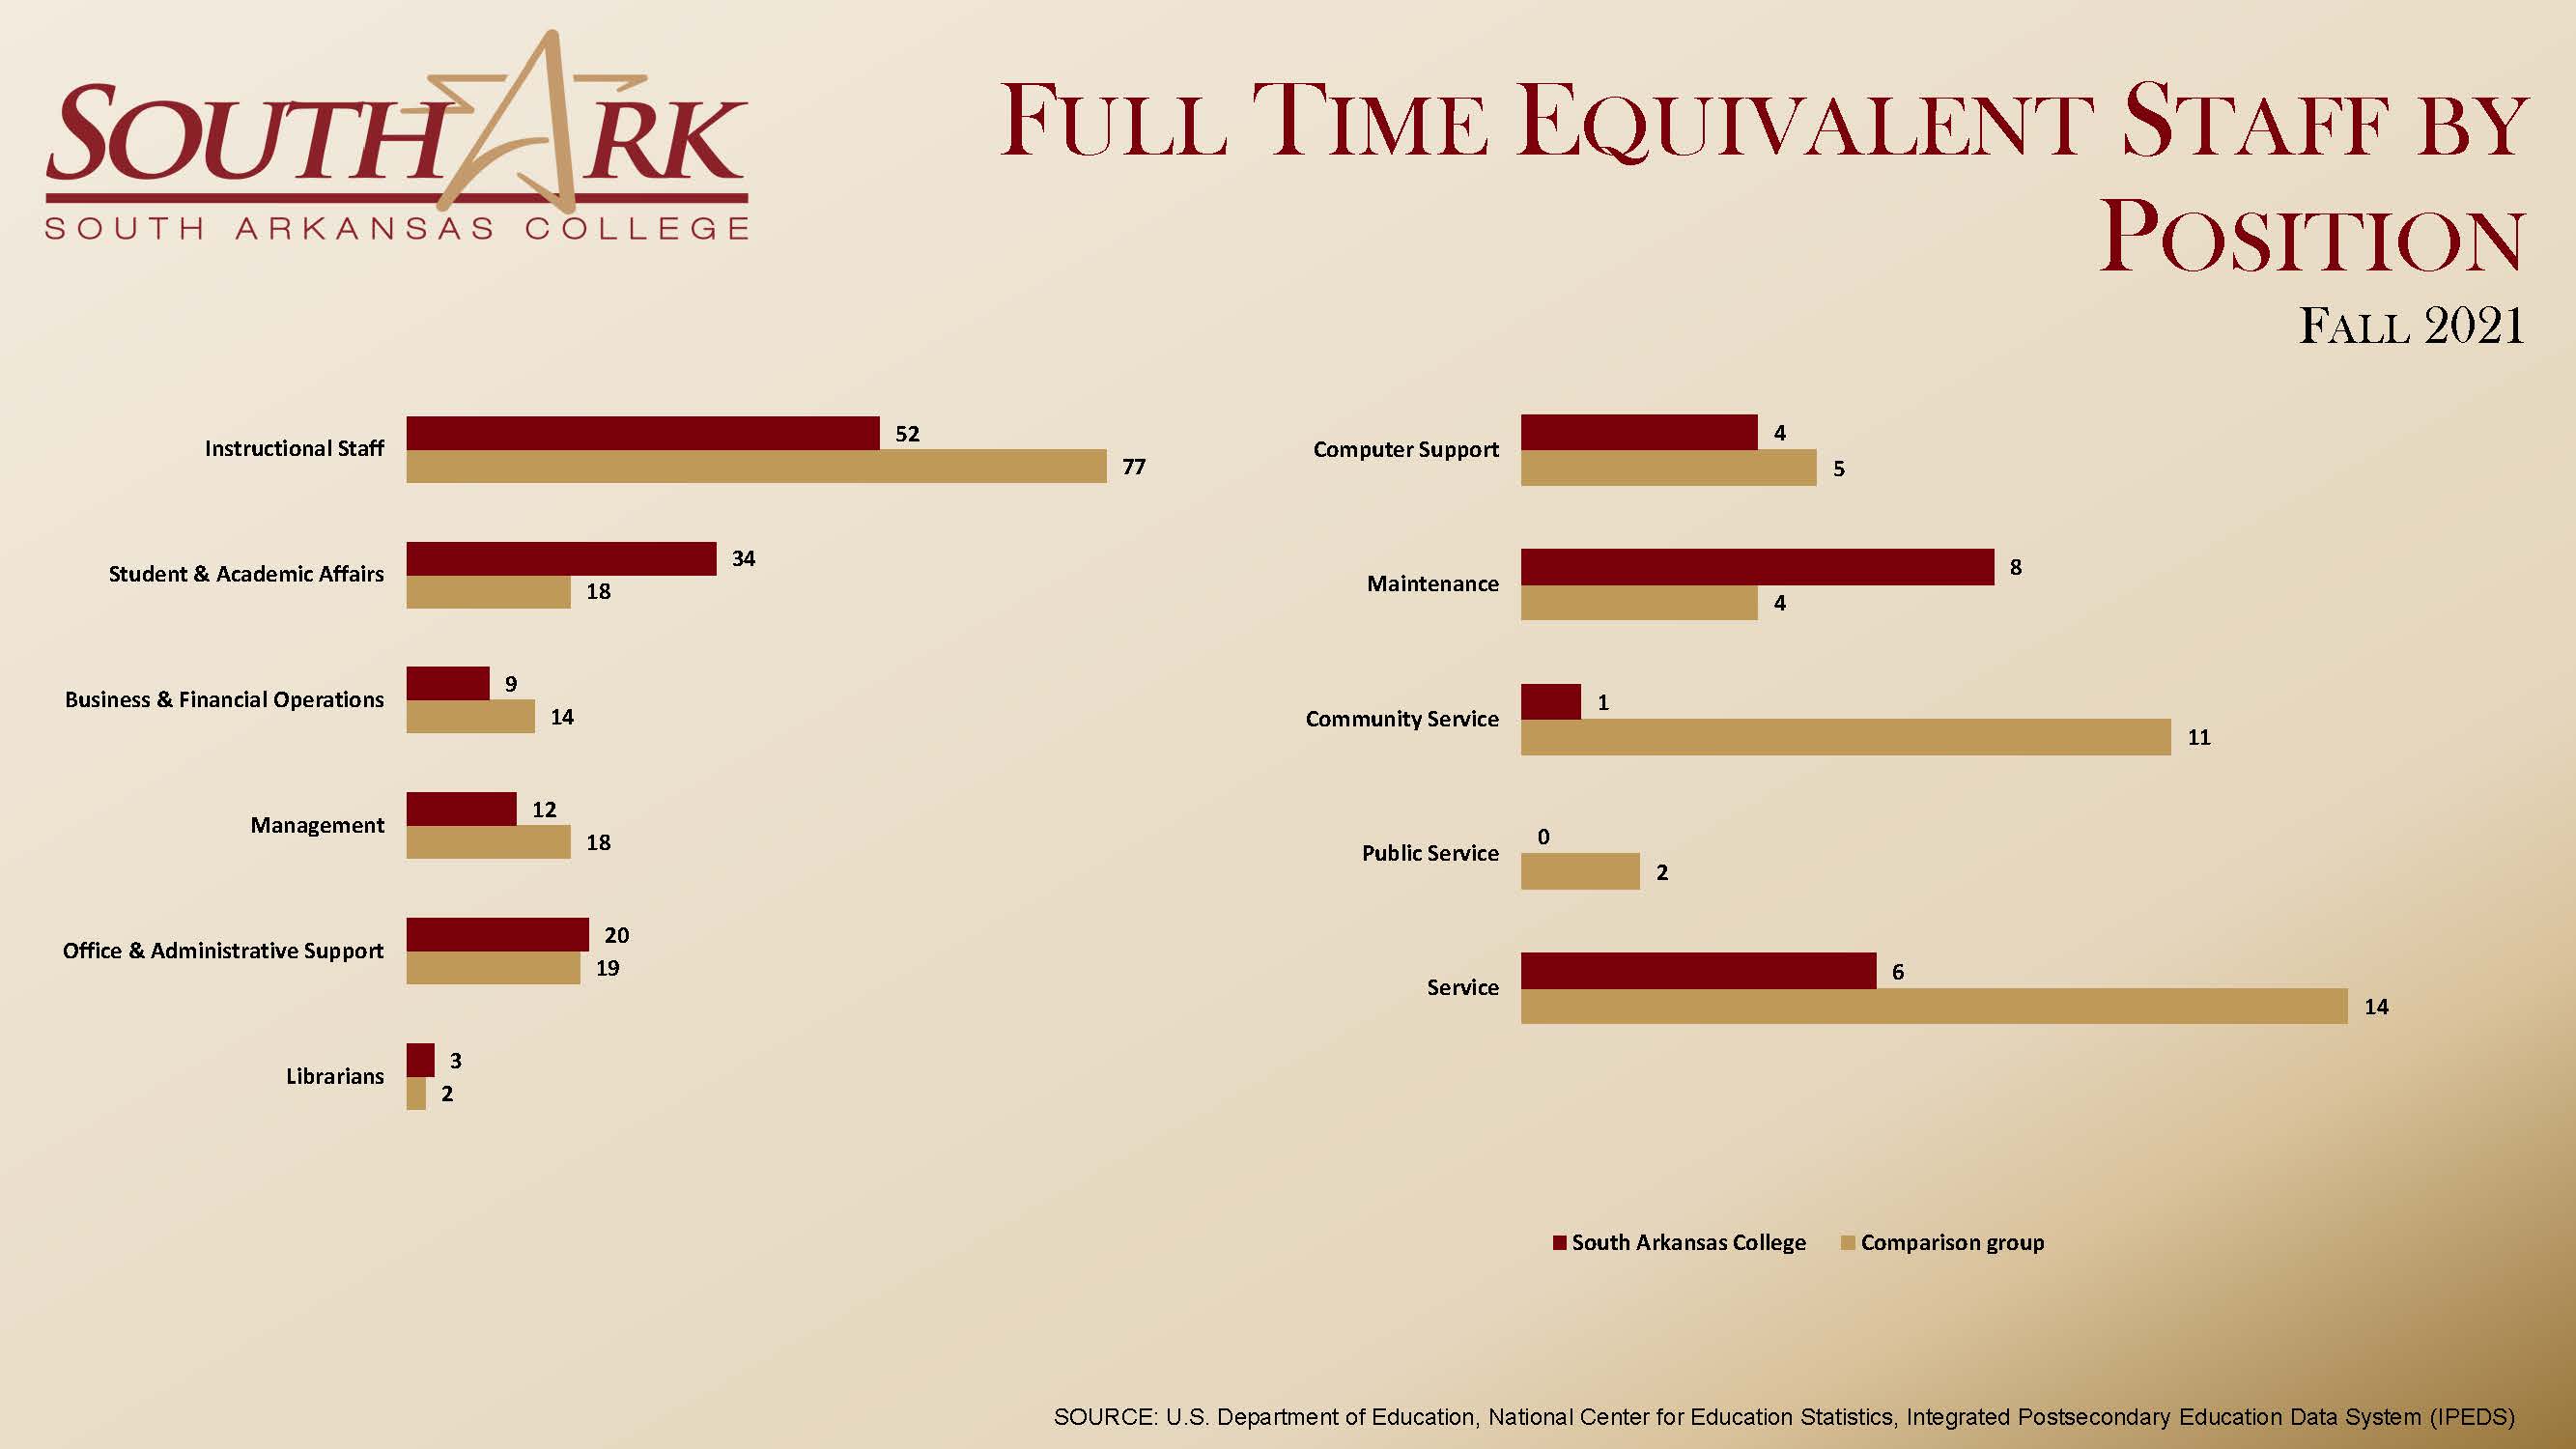 Full Time Equivalent Staff by Position Fall 2021